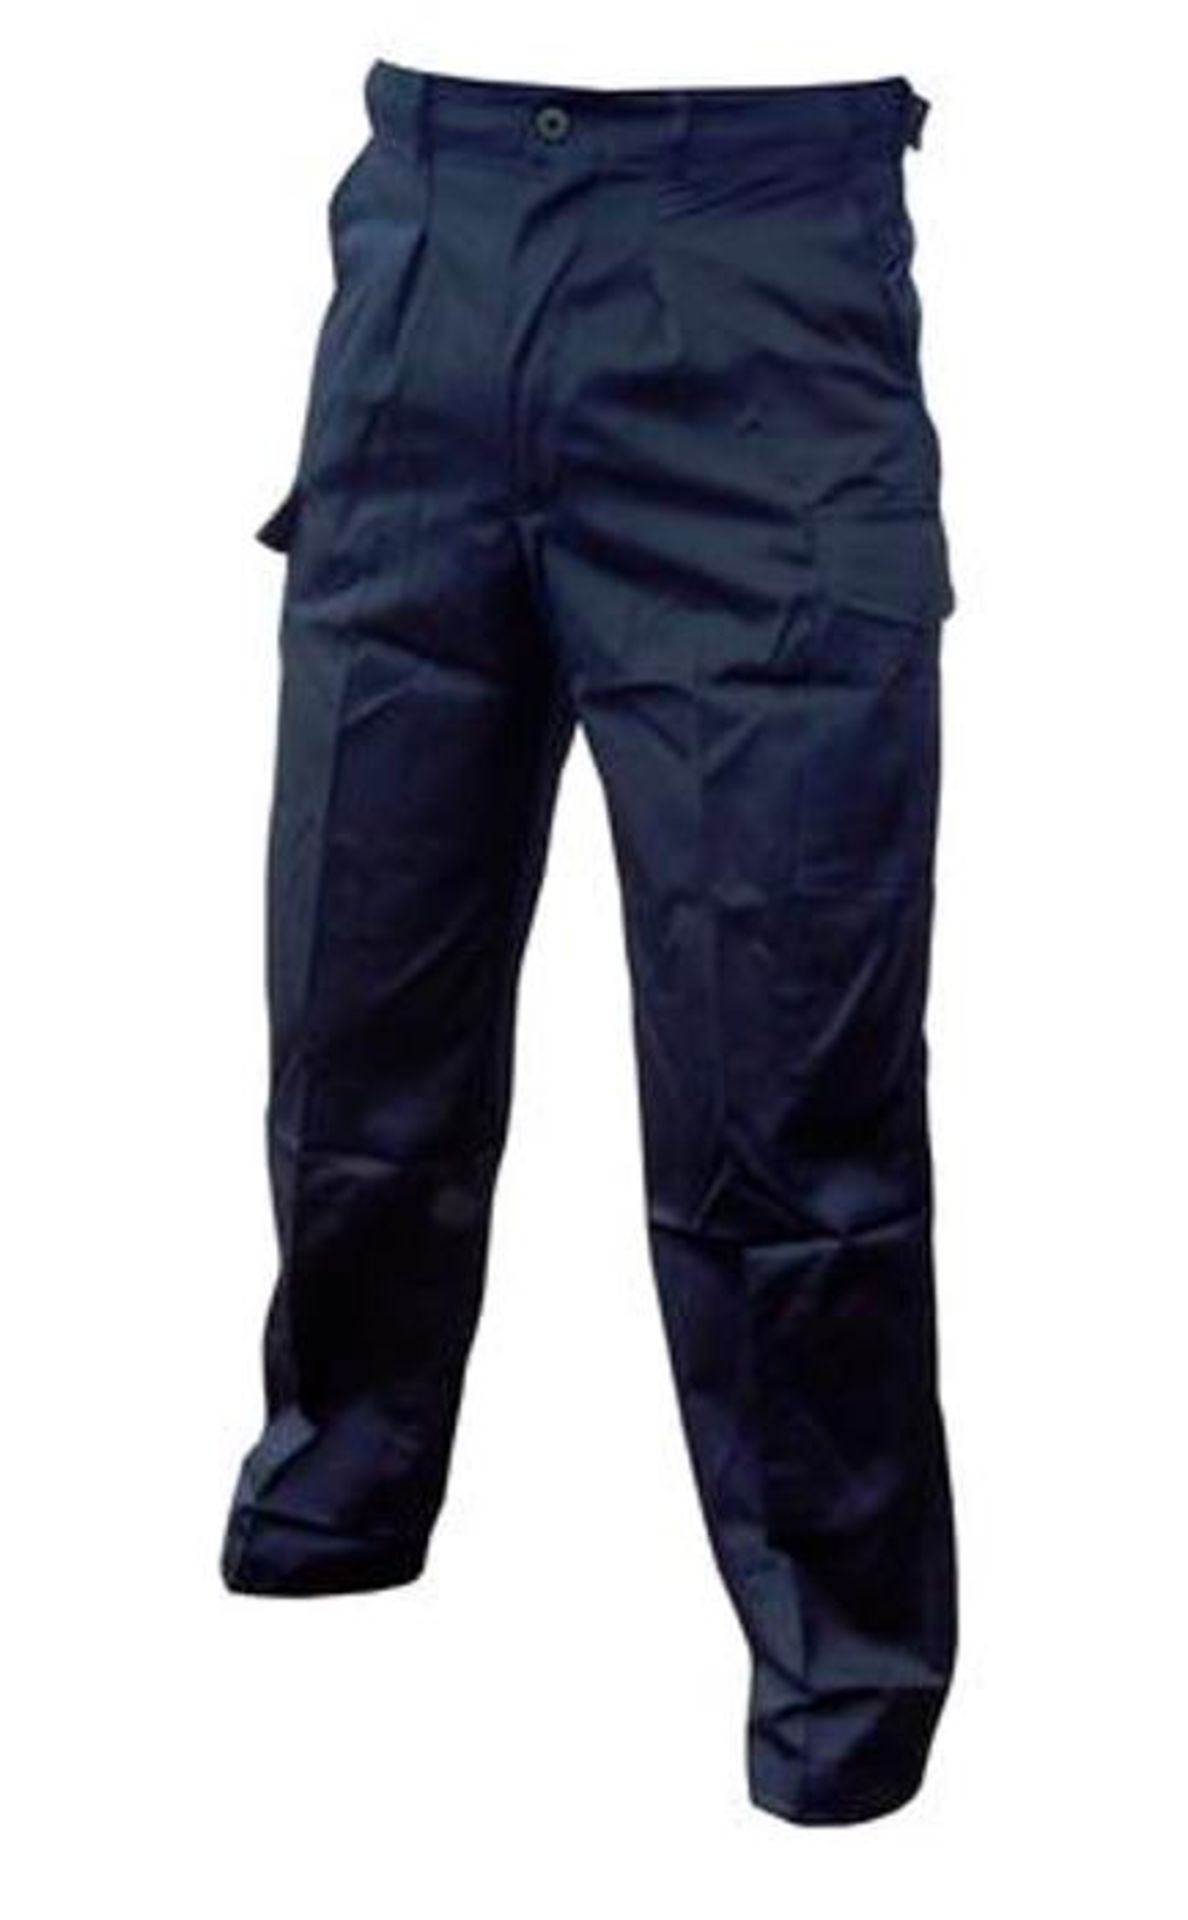 PACK OF 10 Royal Navy Working Trousers - Mix of Sizes - Grade 1 Condition